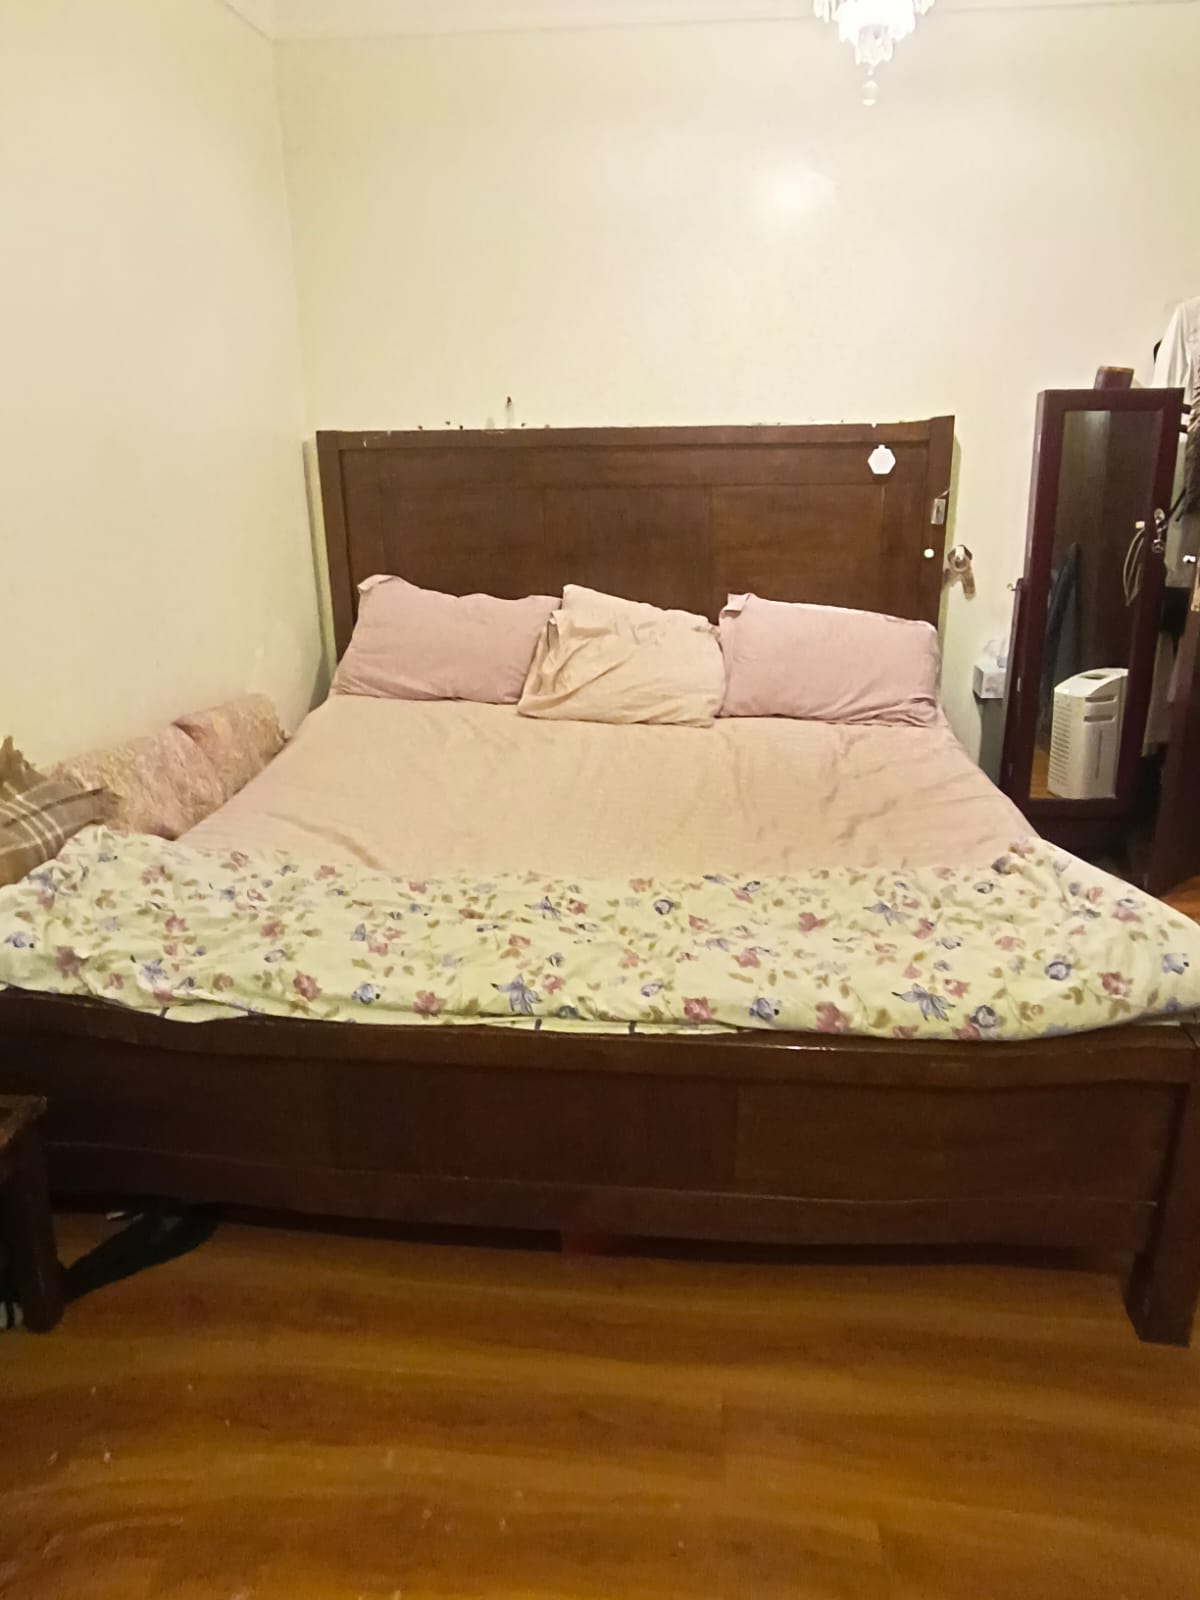 For sale king bed, dressing table and drawers 